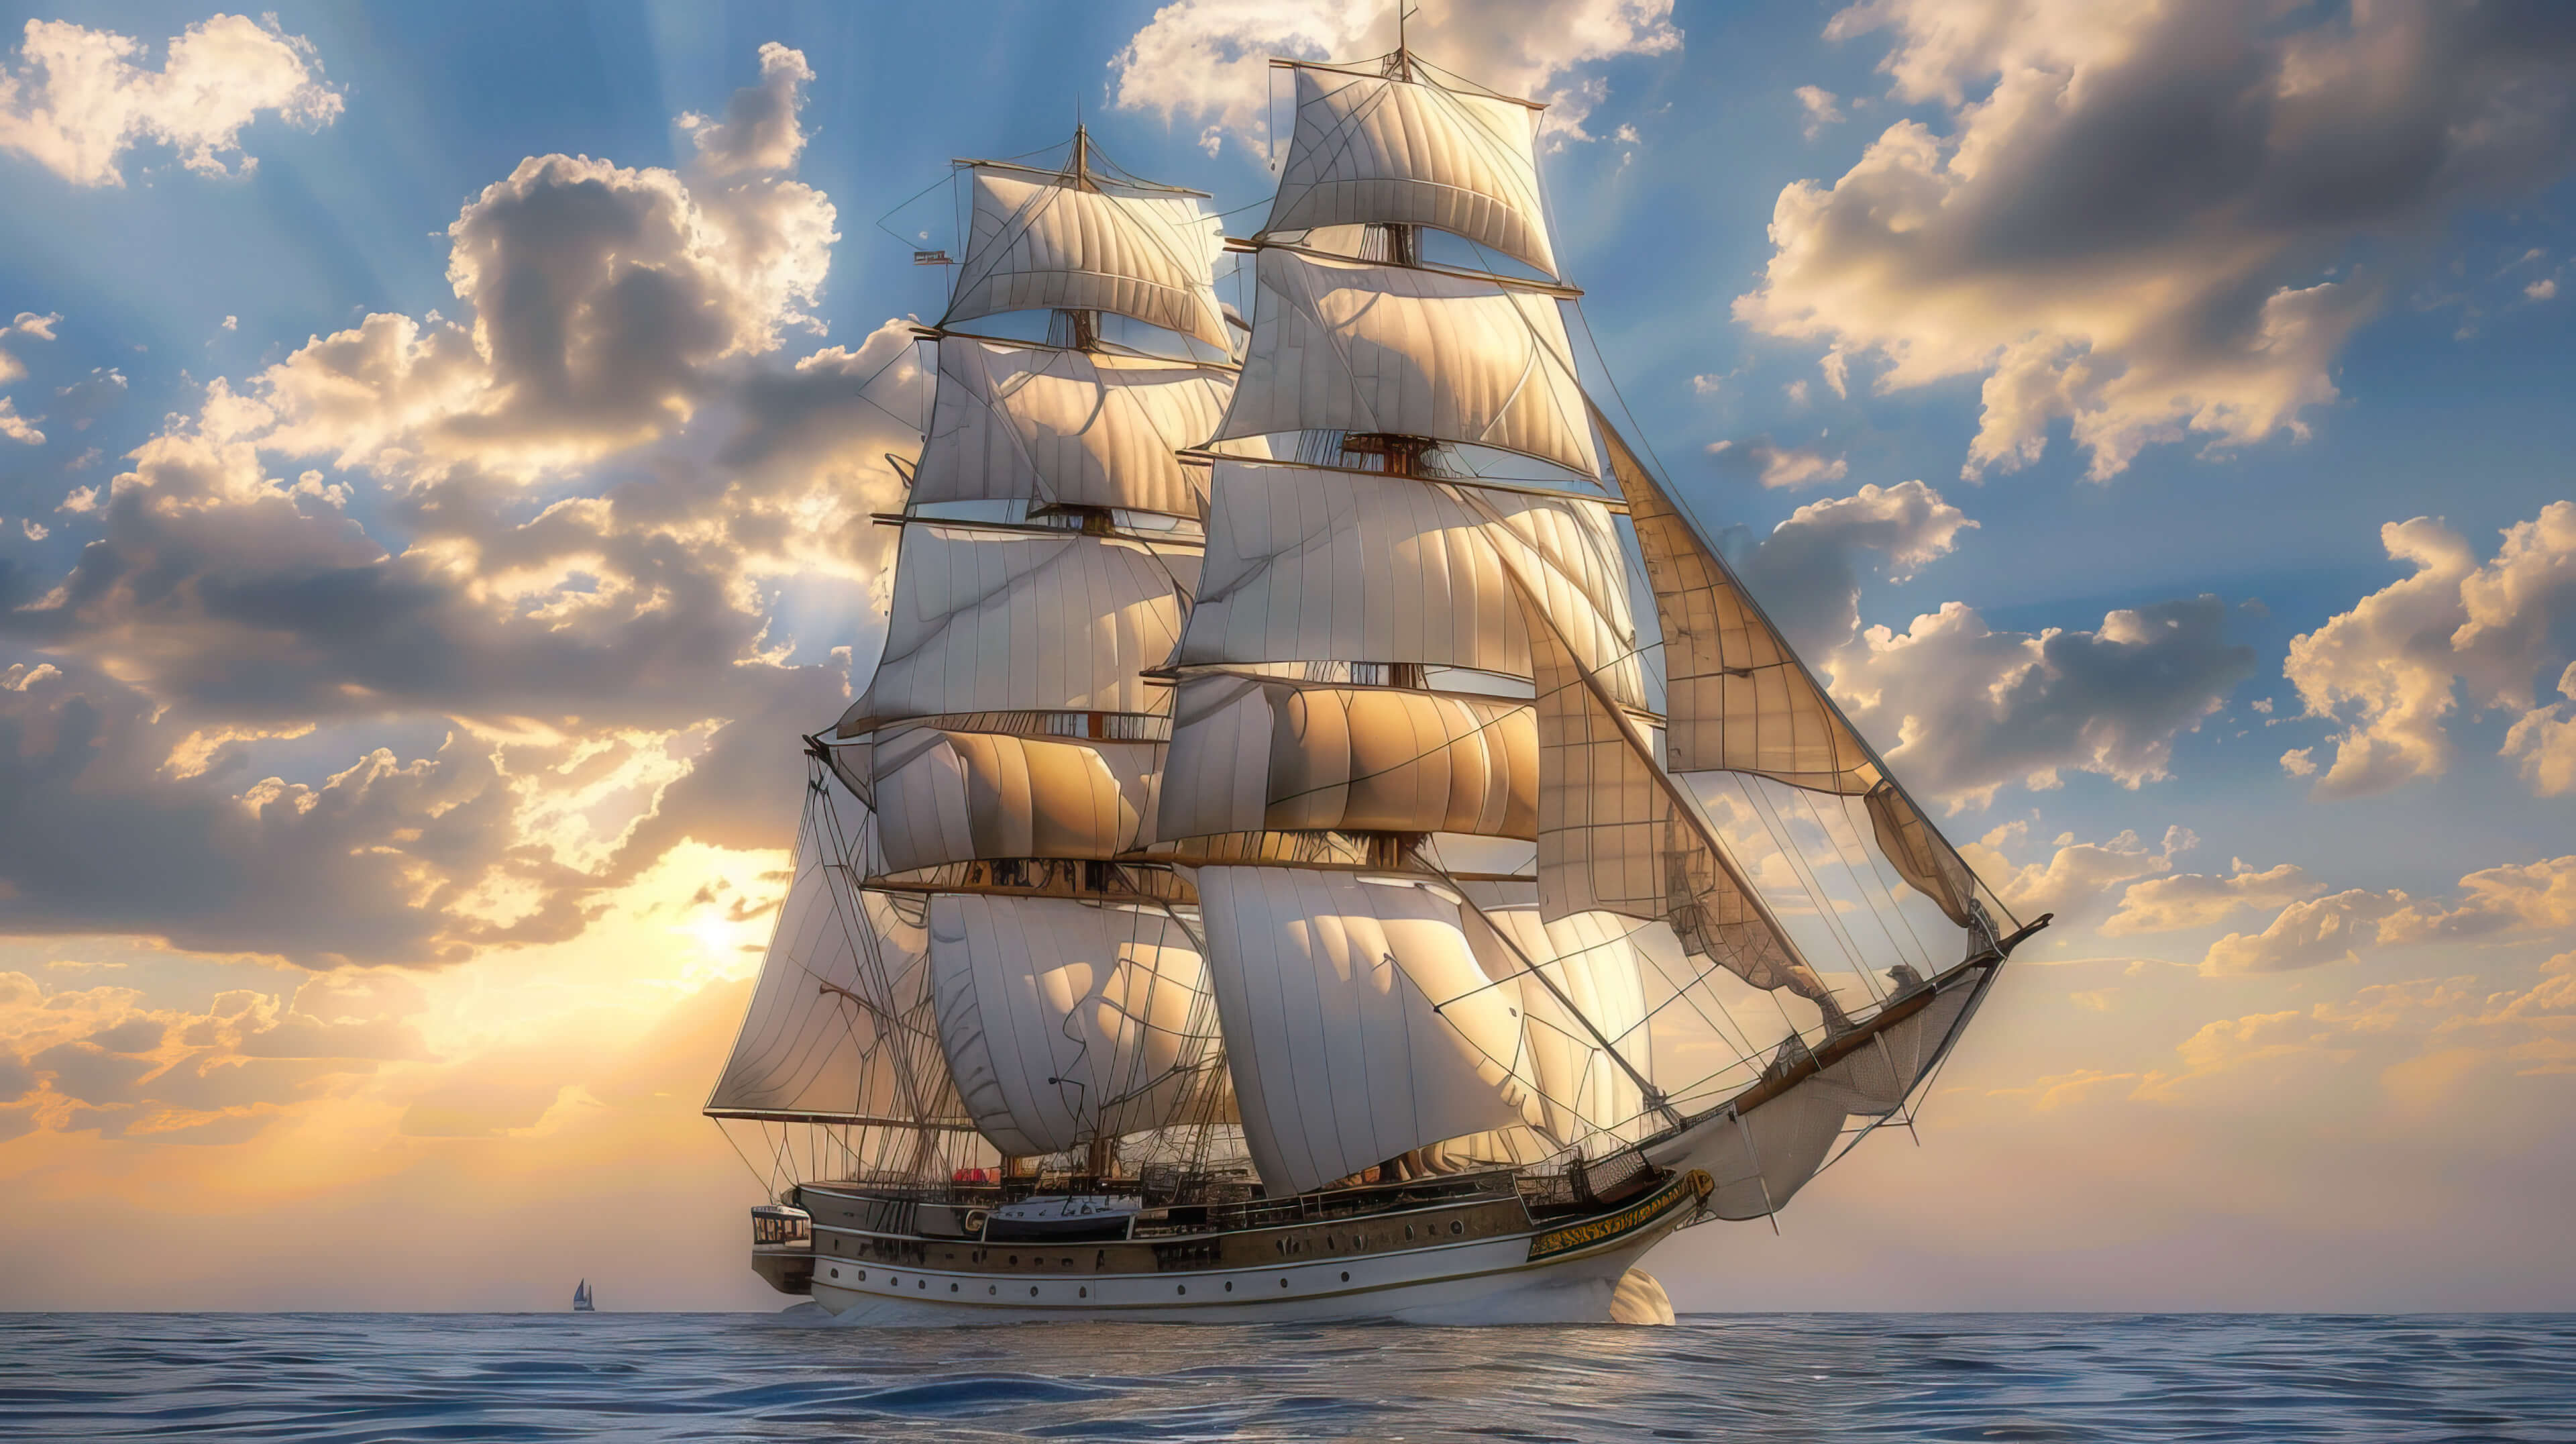 A grand towering vessel with sails unfurled harkening back to a time of sea voyages and discovery